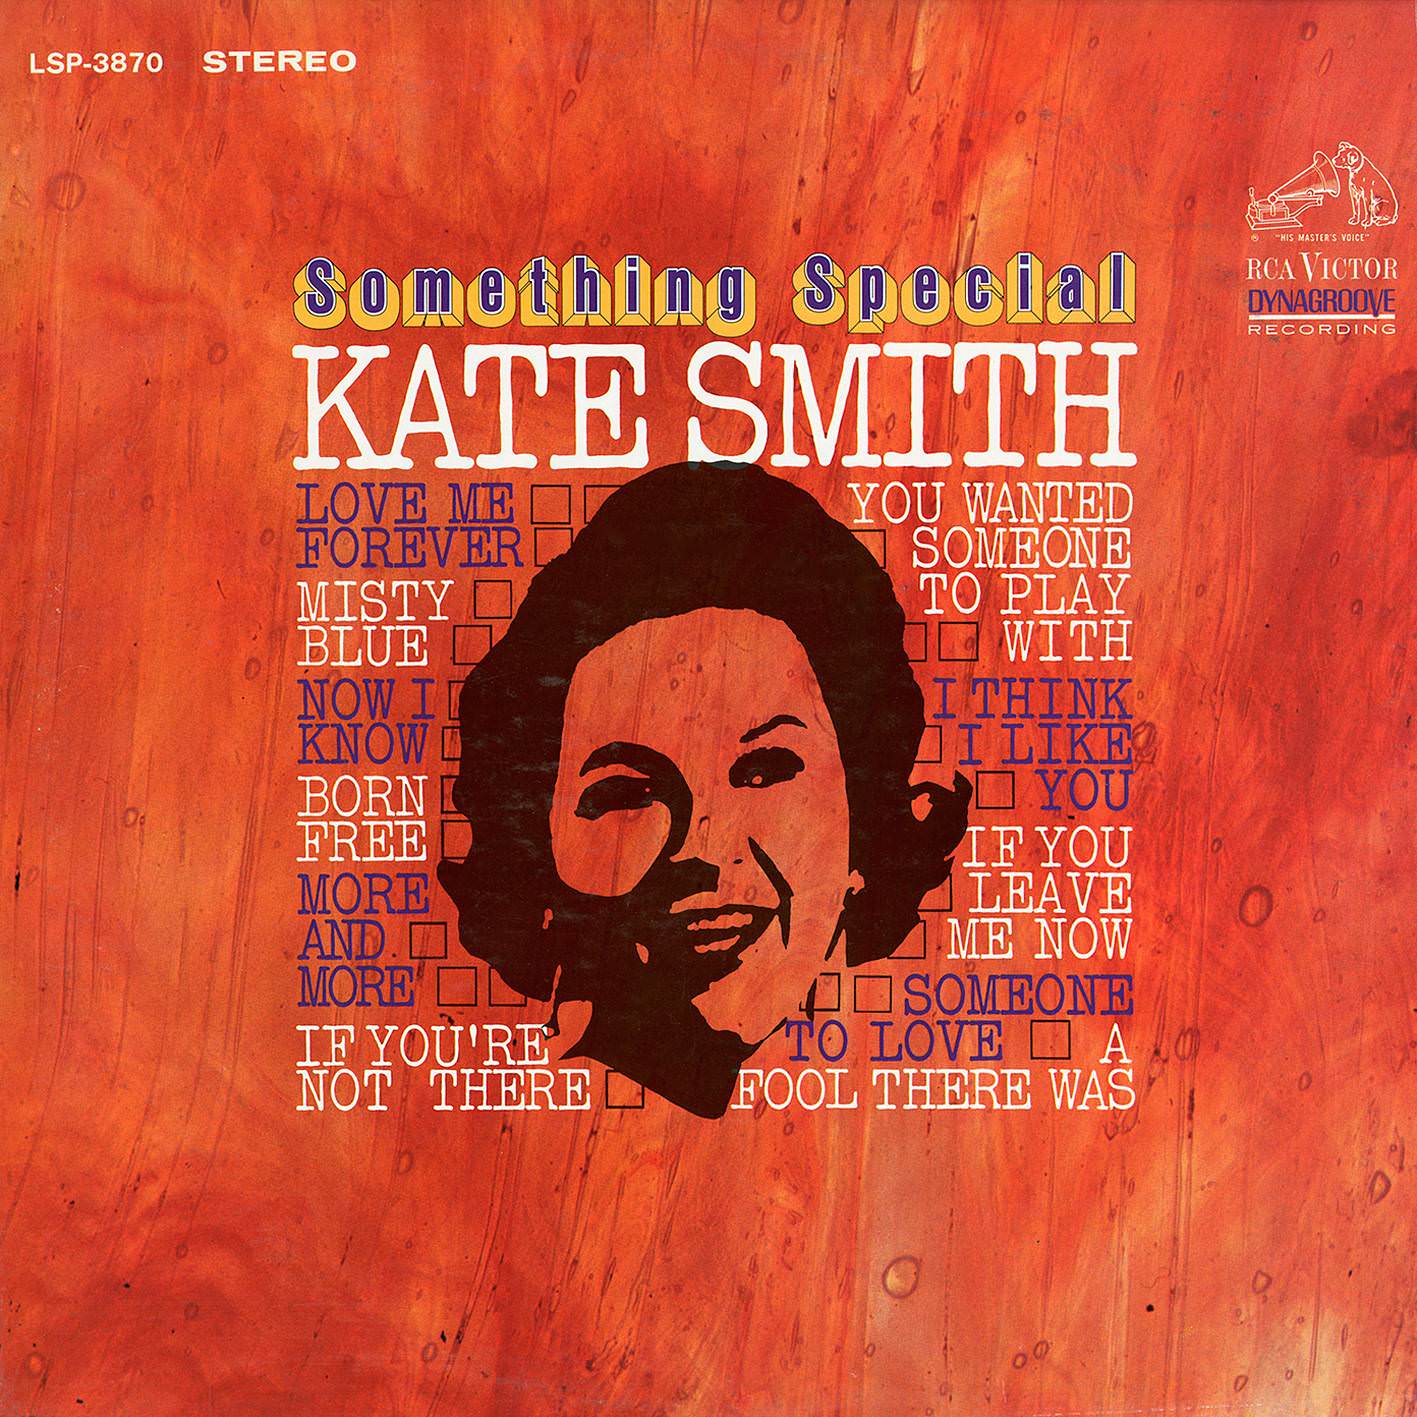 Kate Smith - Something Special (1967/2017) [AcousticSounds FLAC 24bit/192kHz]